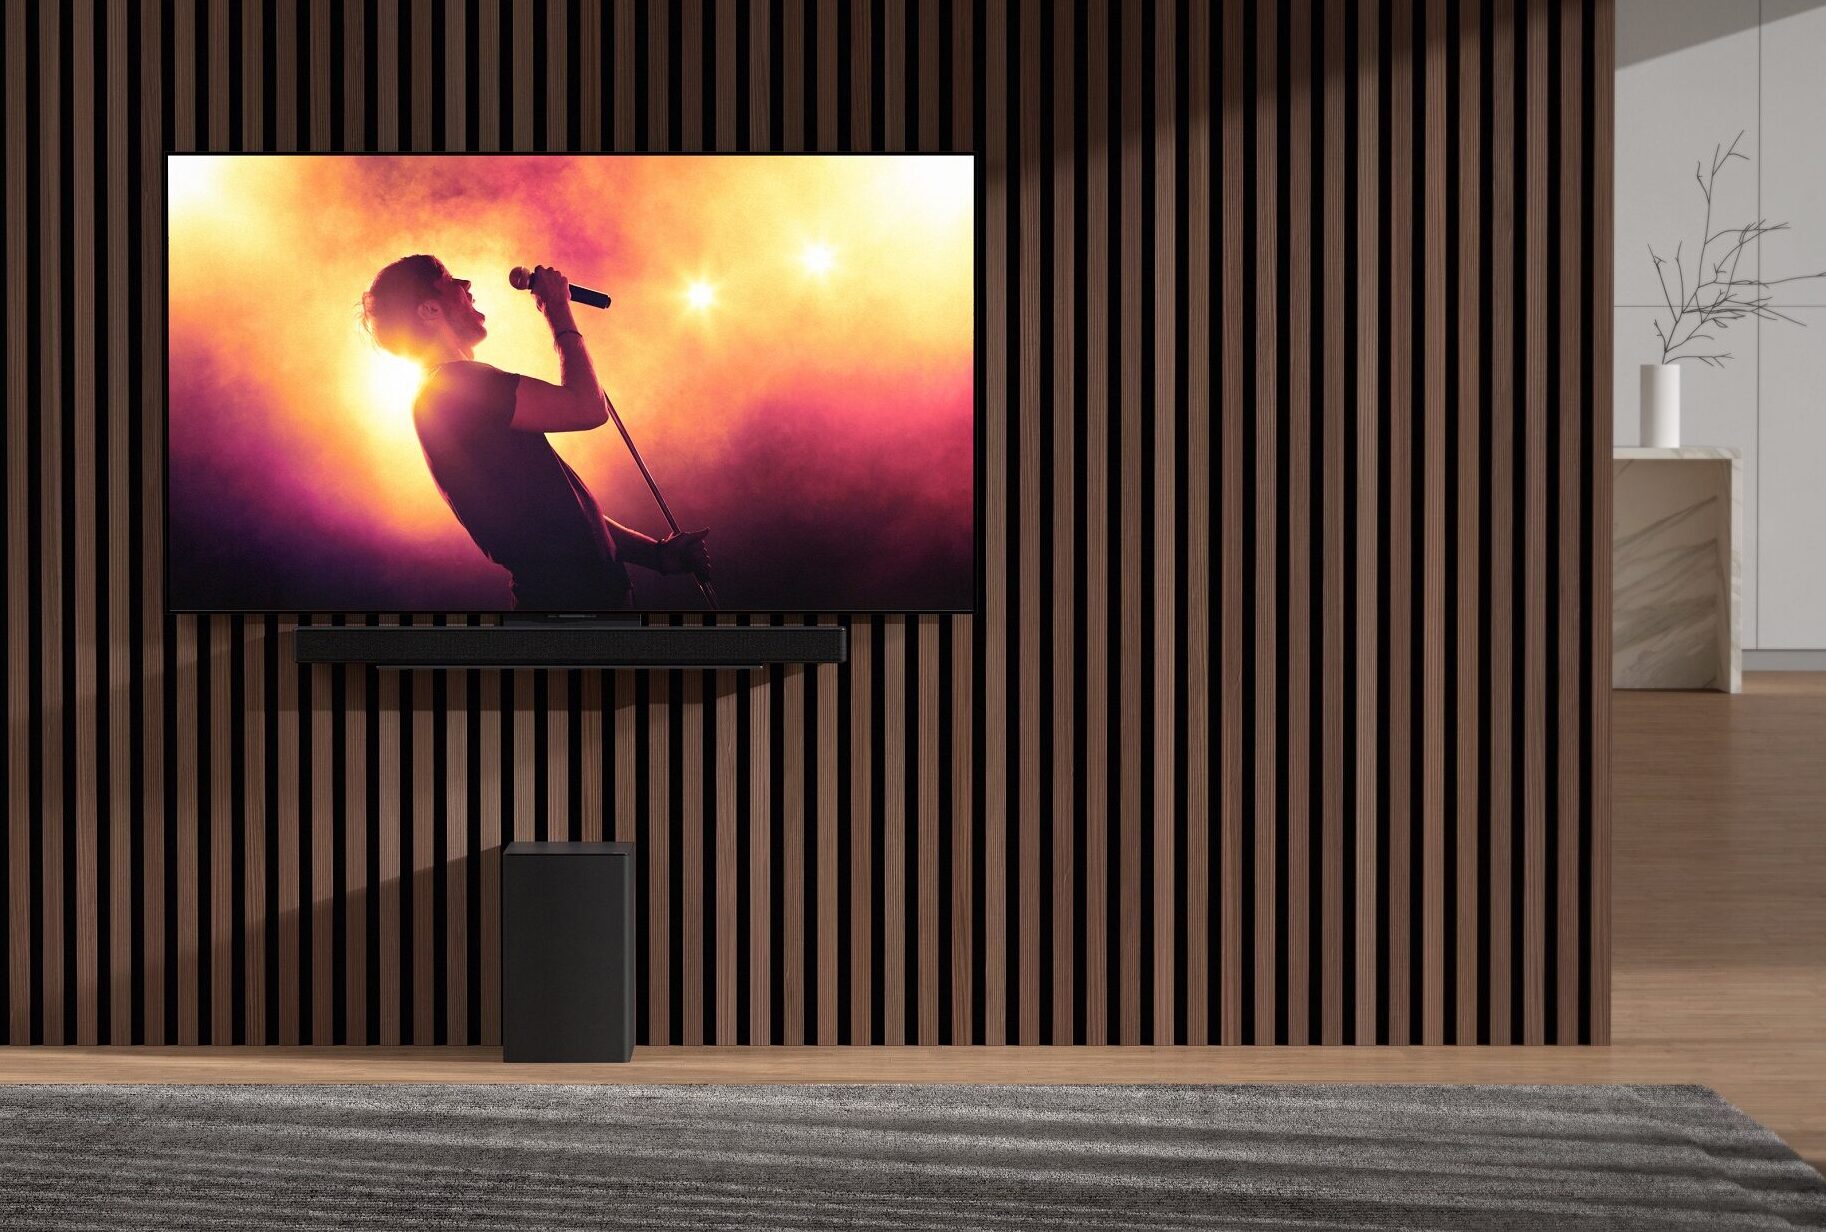 Nnew LG sSoundbar and wireless subwoofer harmonizing with an LG TV in an apartment as it displays a music concert with bright lights